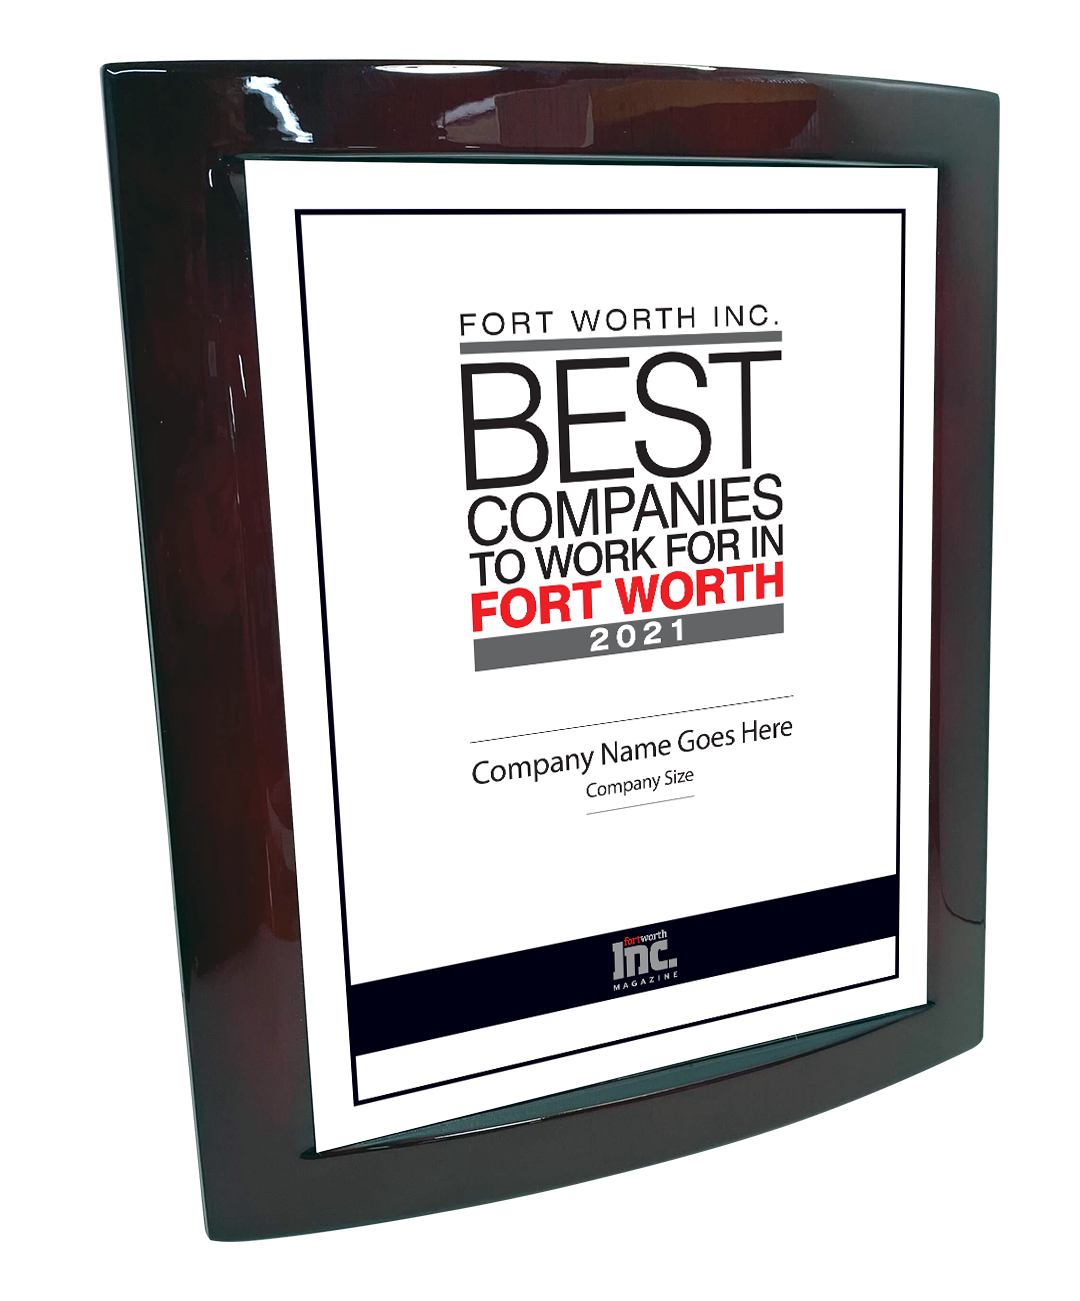 Fort Worth Inc. Best Companies to Work For Award Rosewood with Metal Inlay